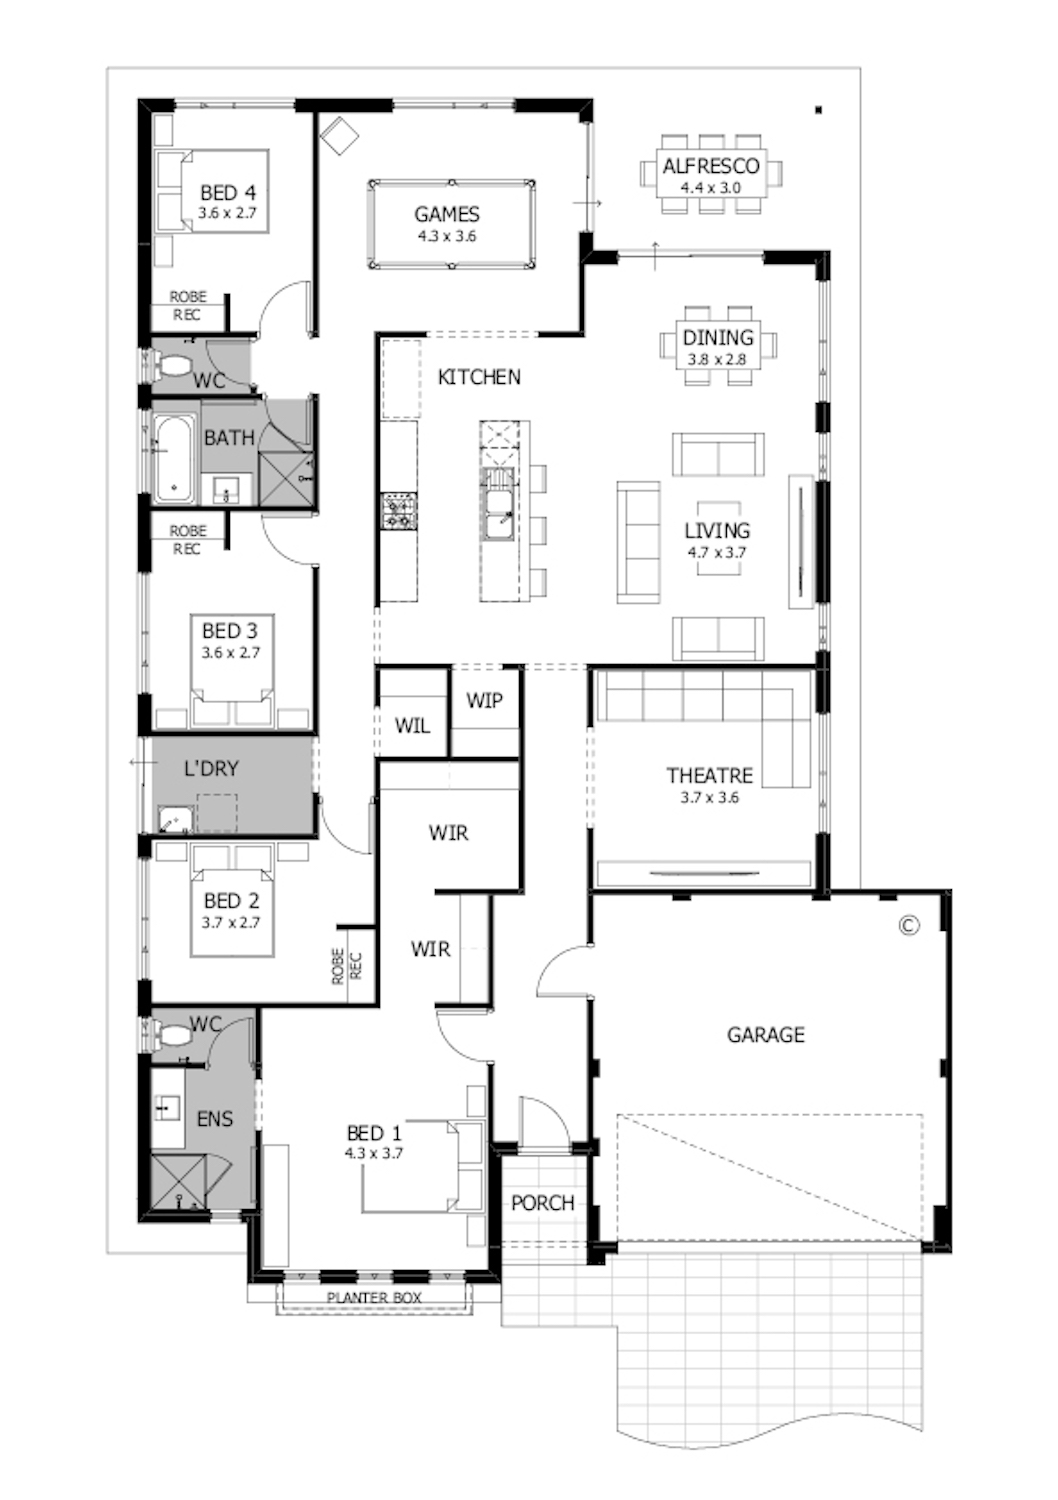 le-grand-by-homebuyers-centre-floorplan-house-and-land-package-vasse-estate-western-australia